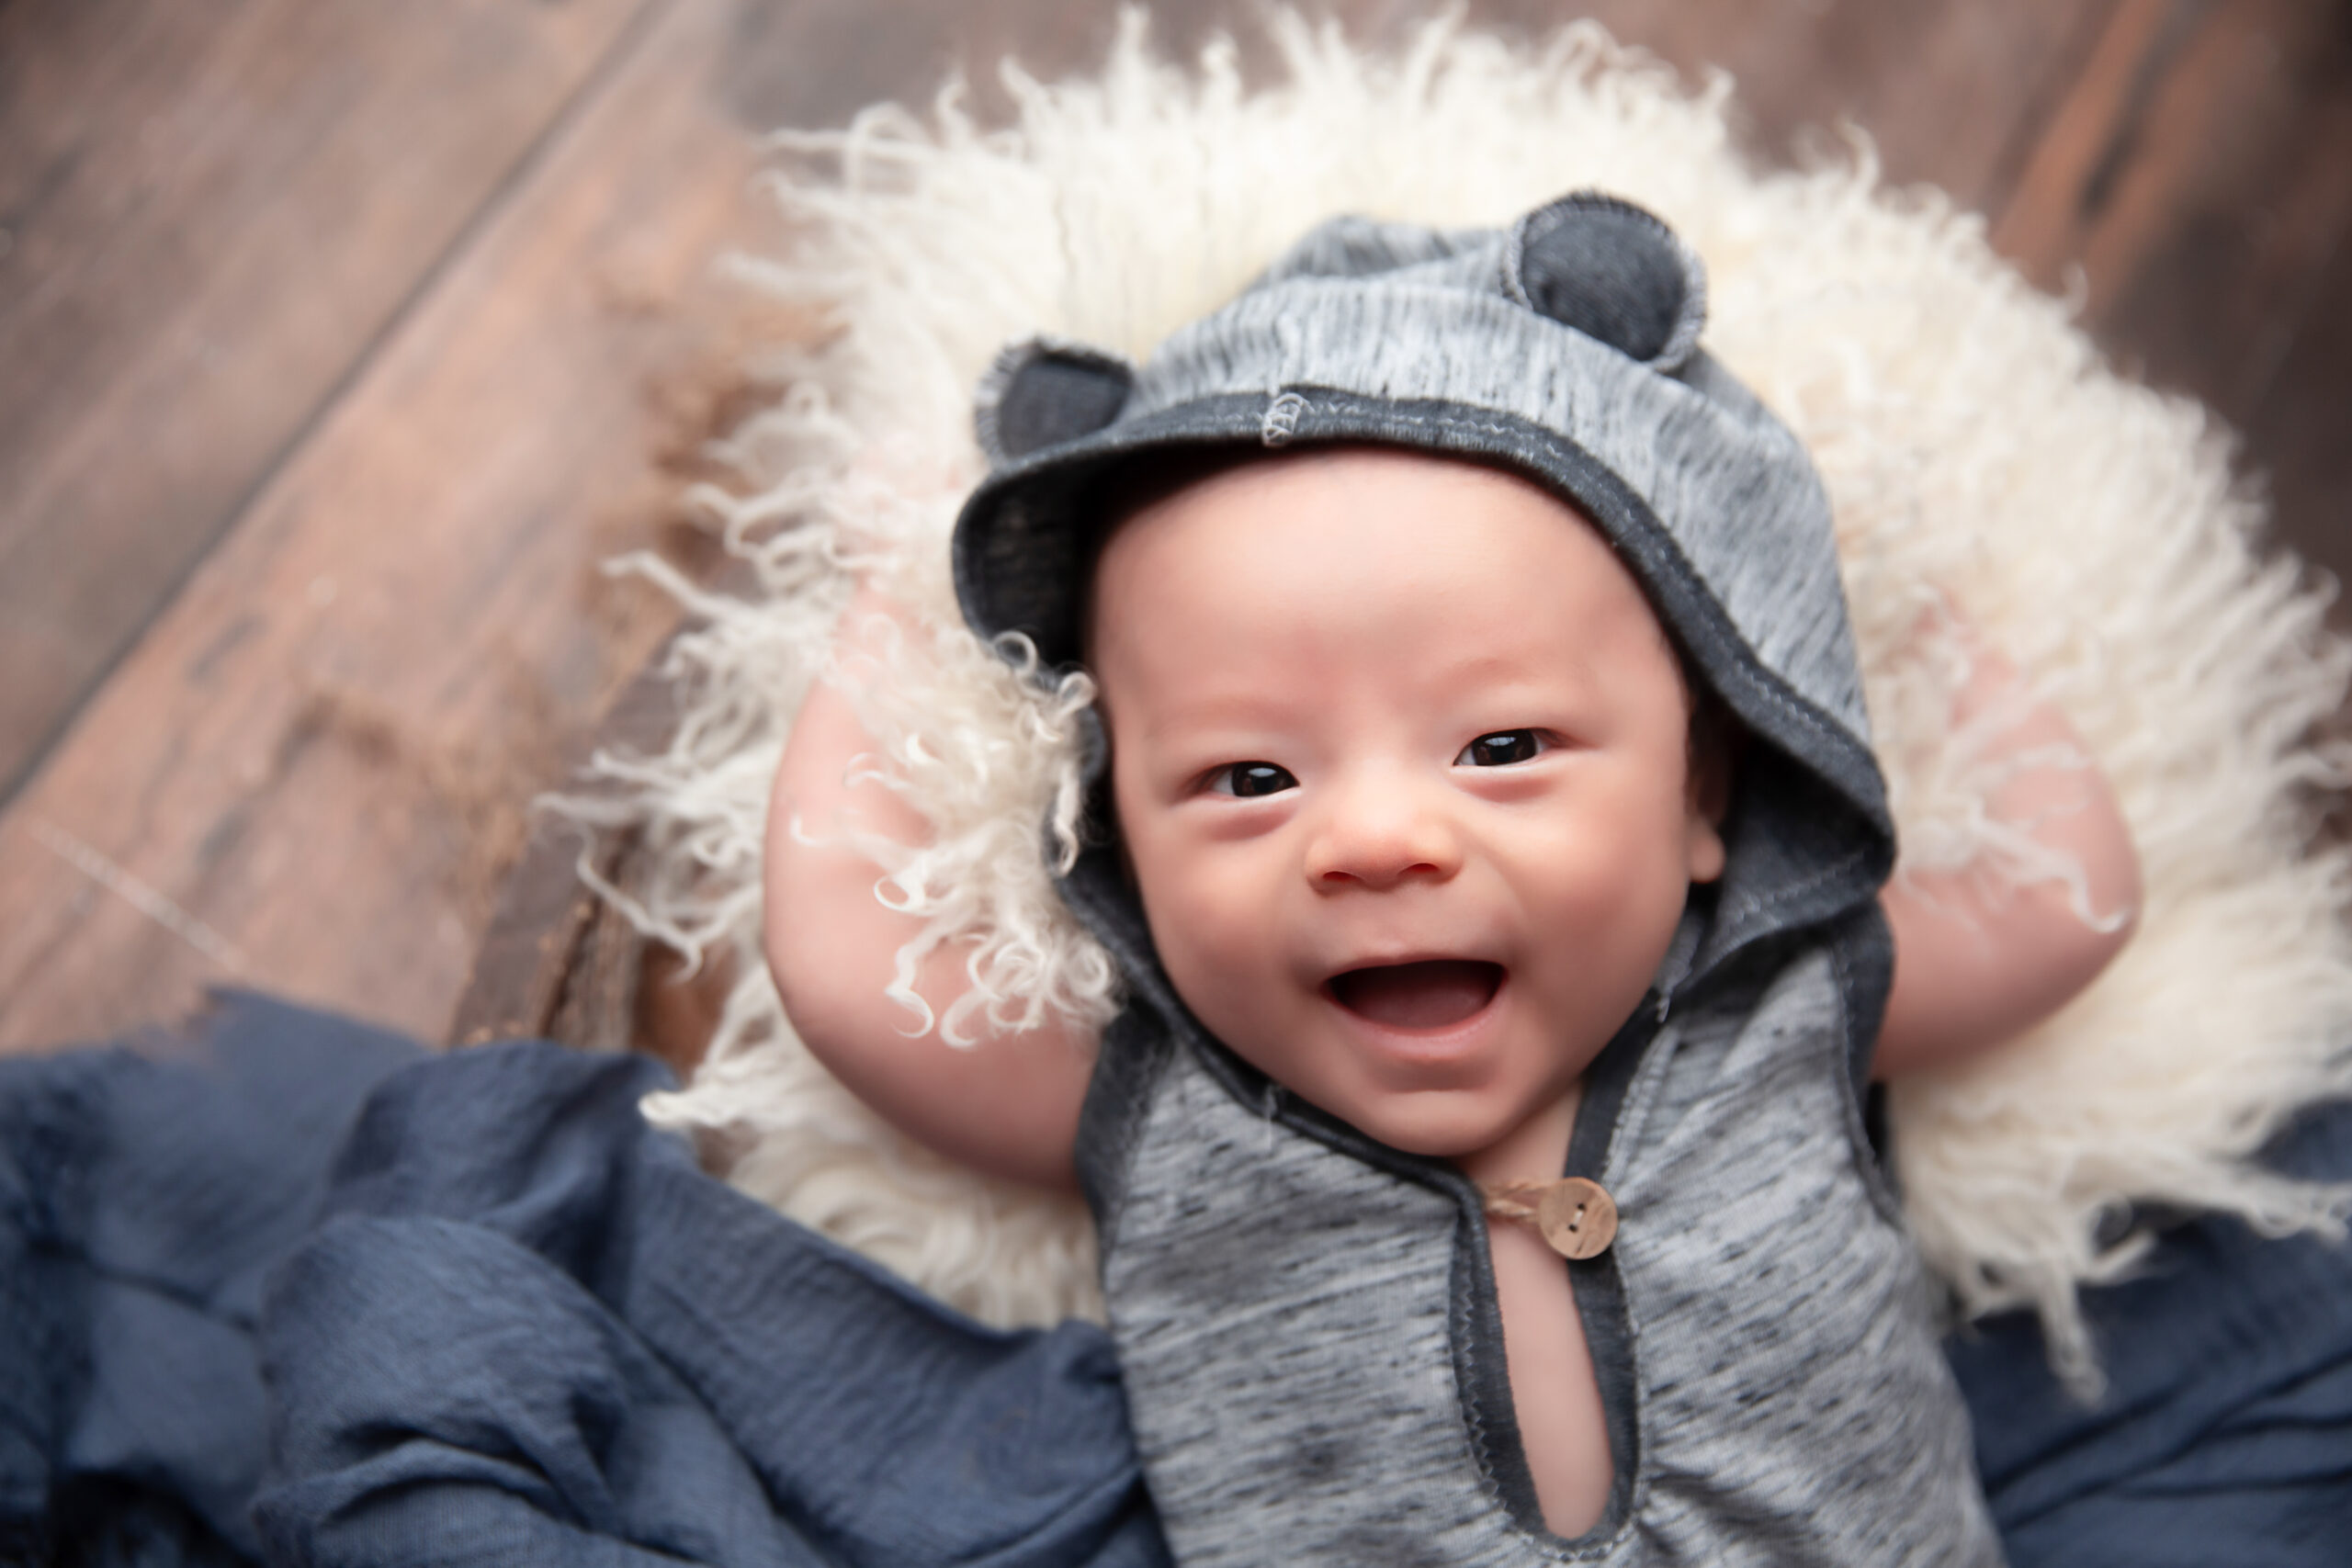 Baby smiling wearing a blue outfit with a hood with ears on them.